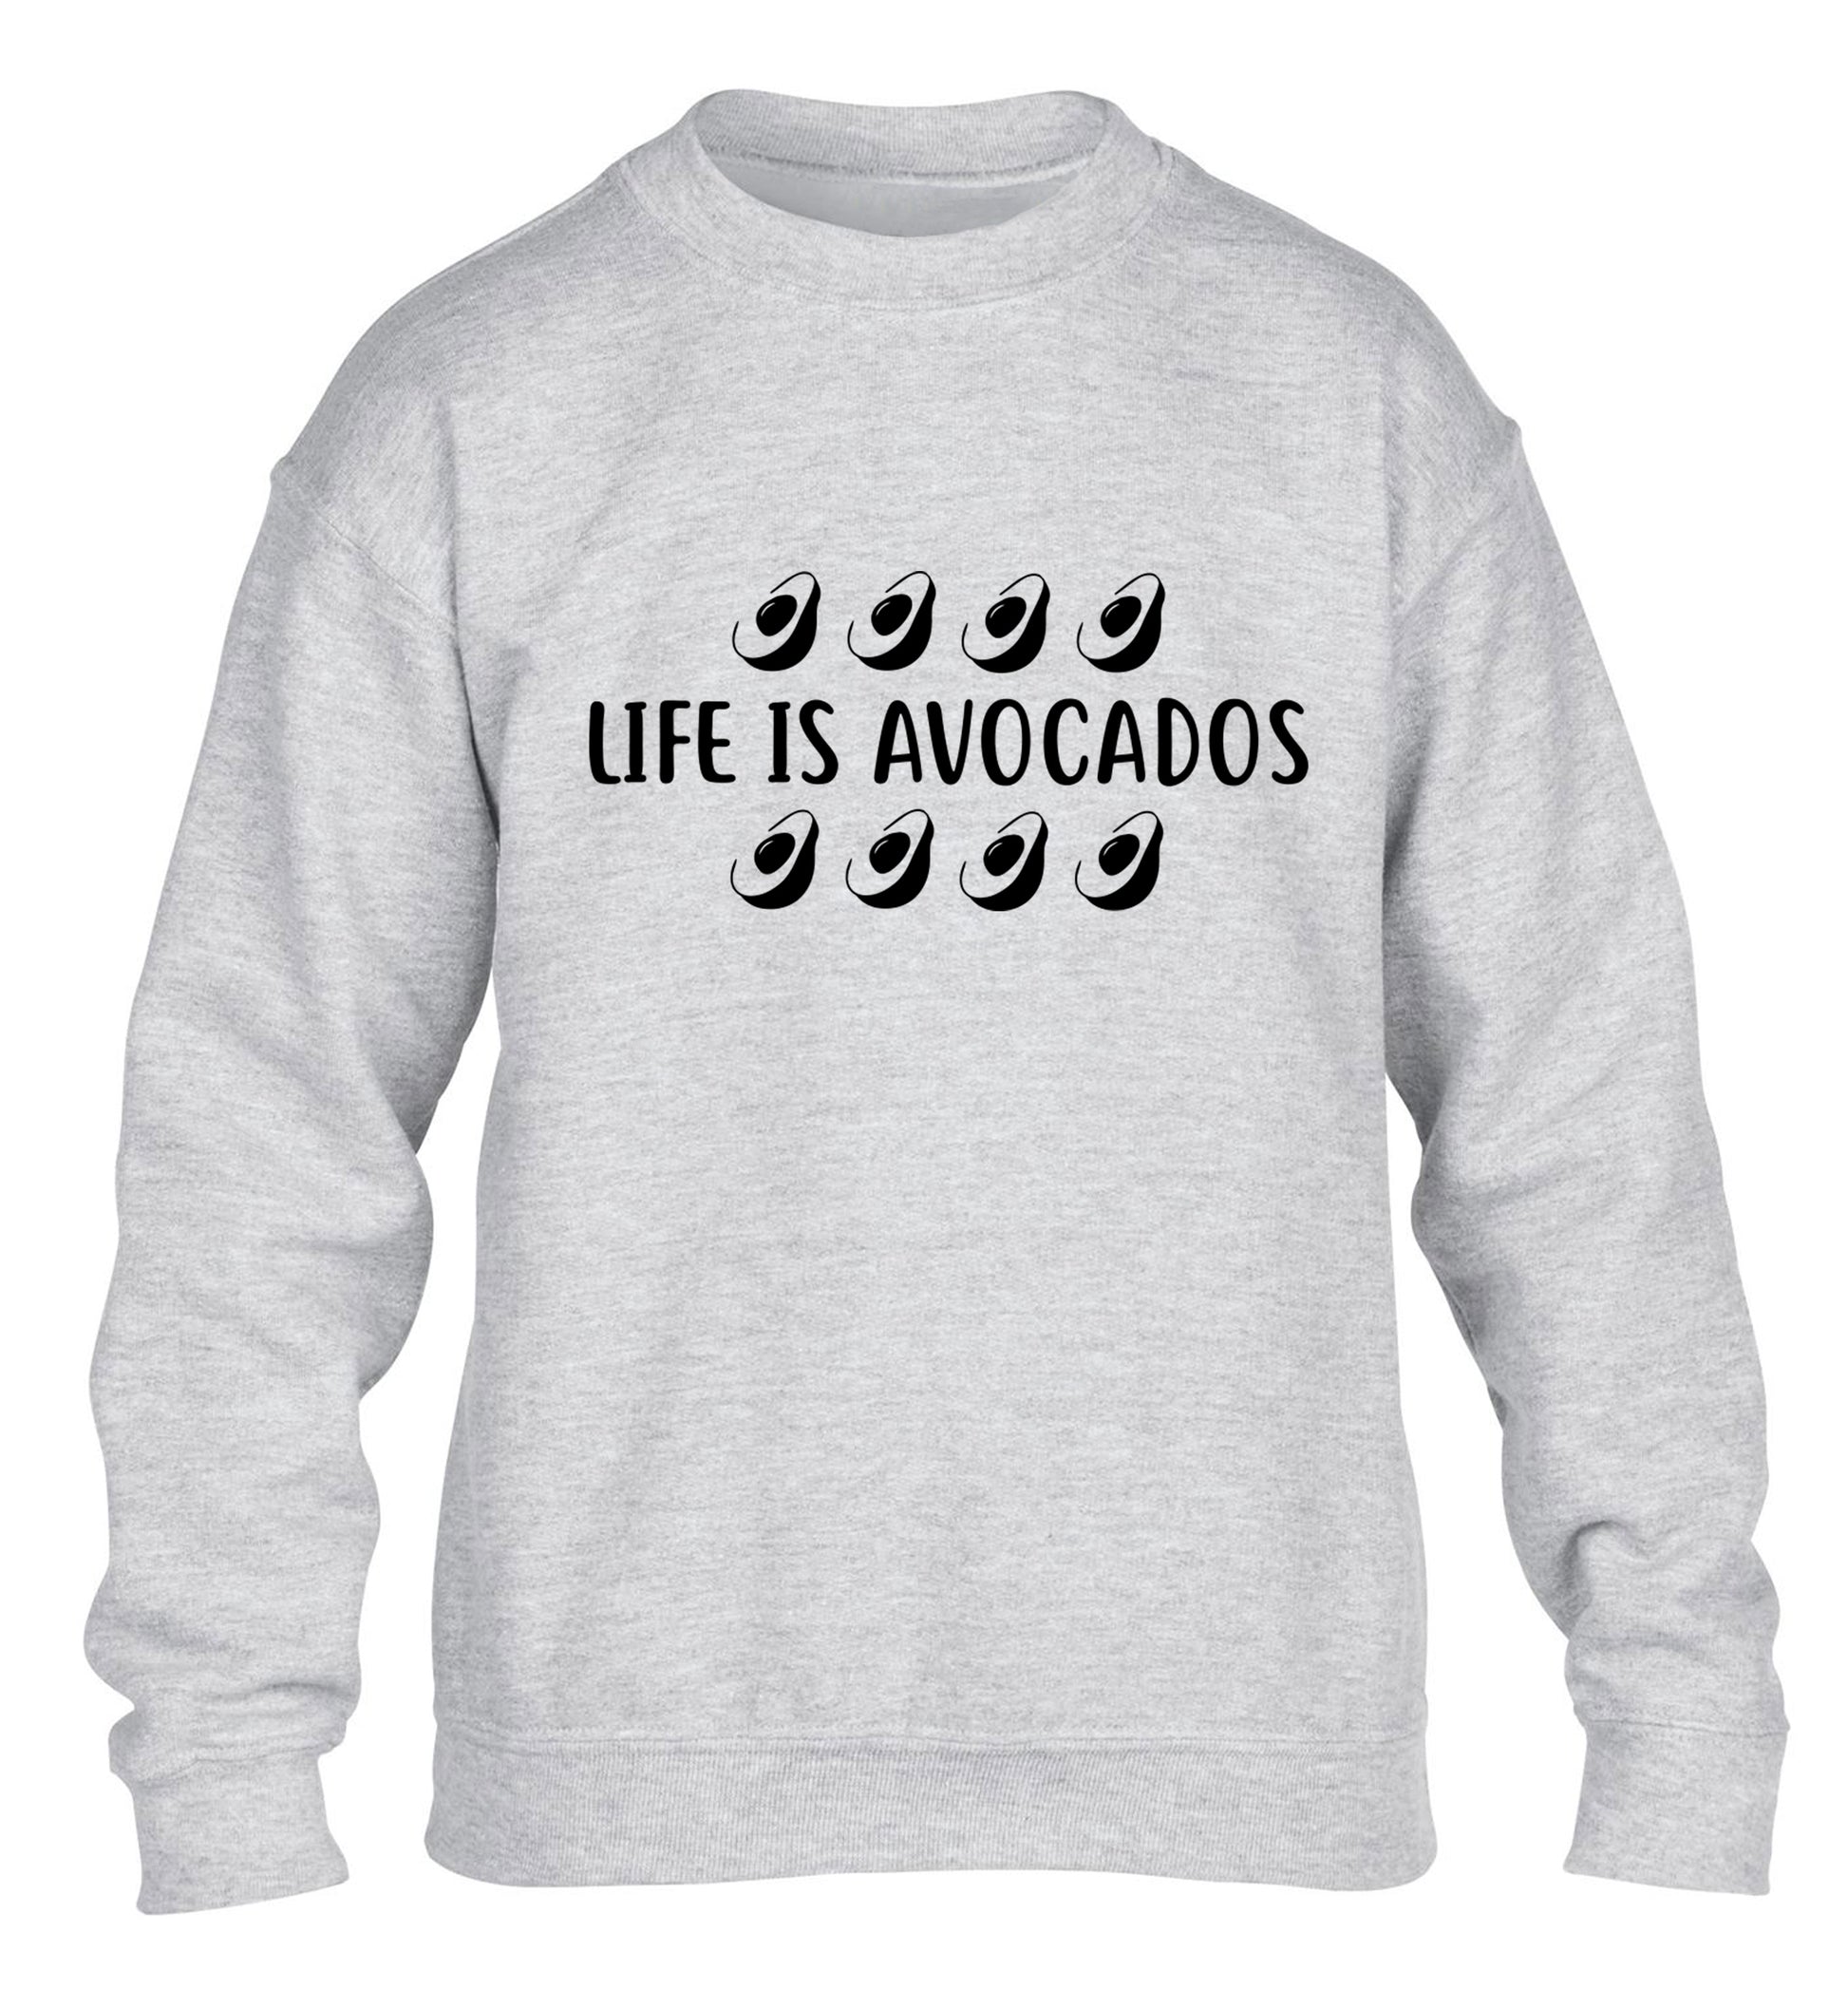 Life is avocados children's grey sweater 12-14 Years